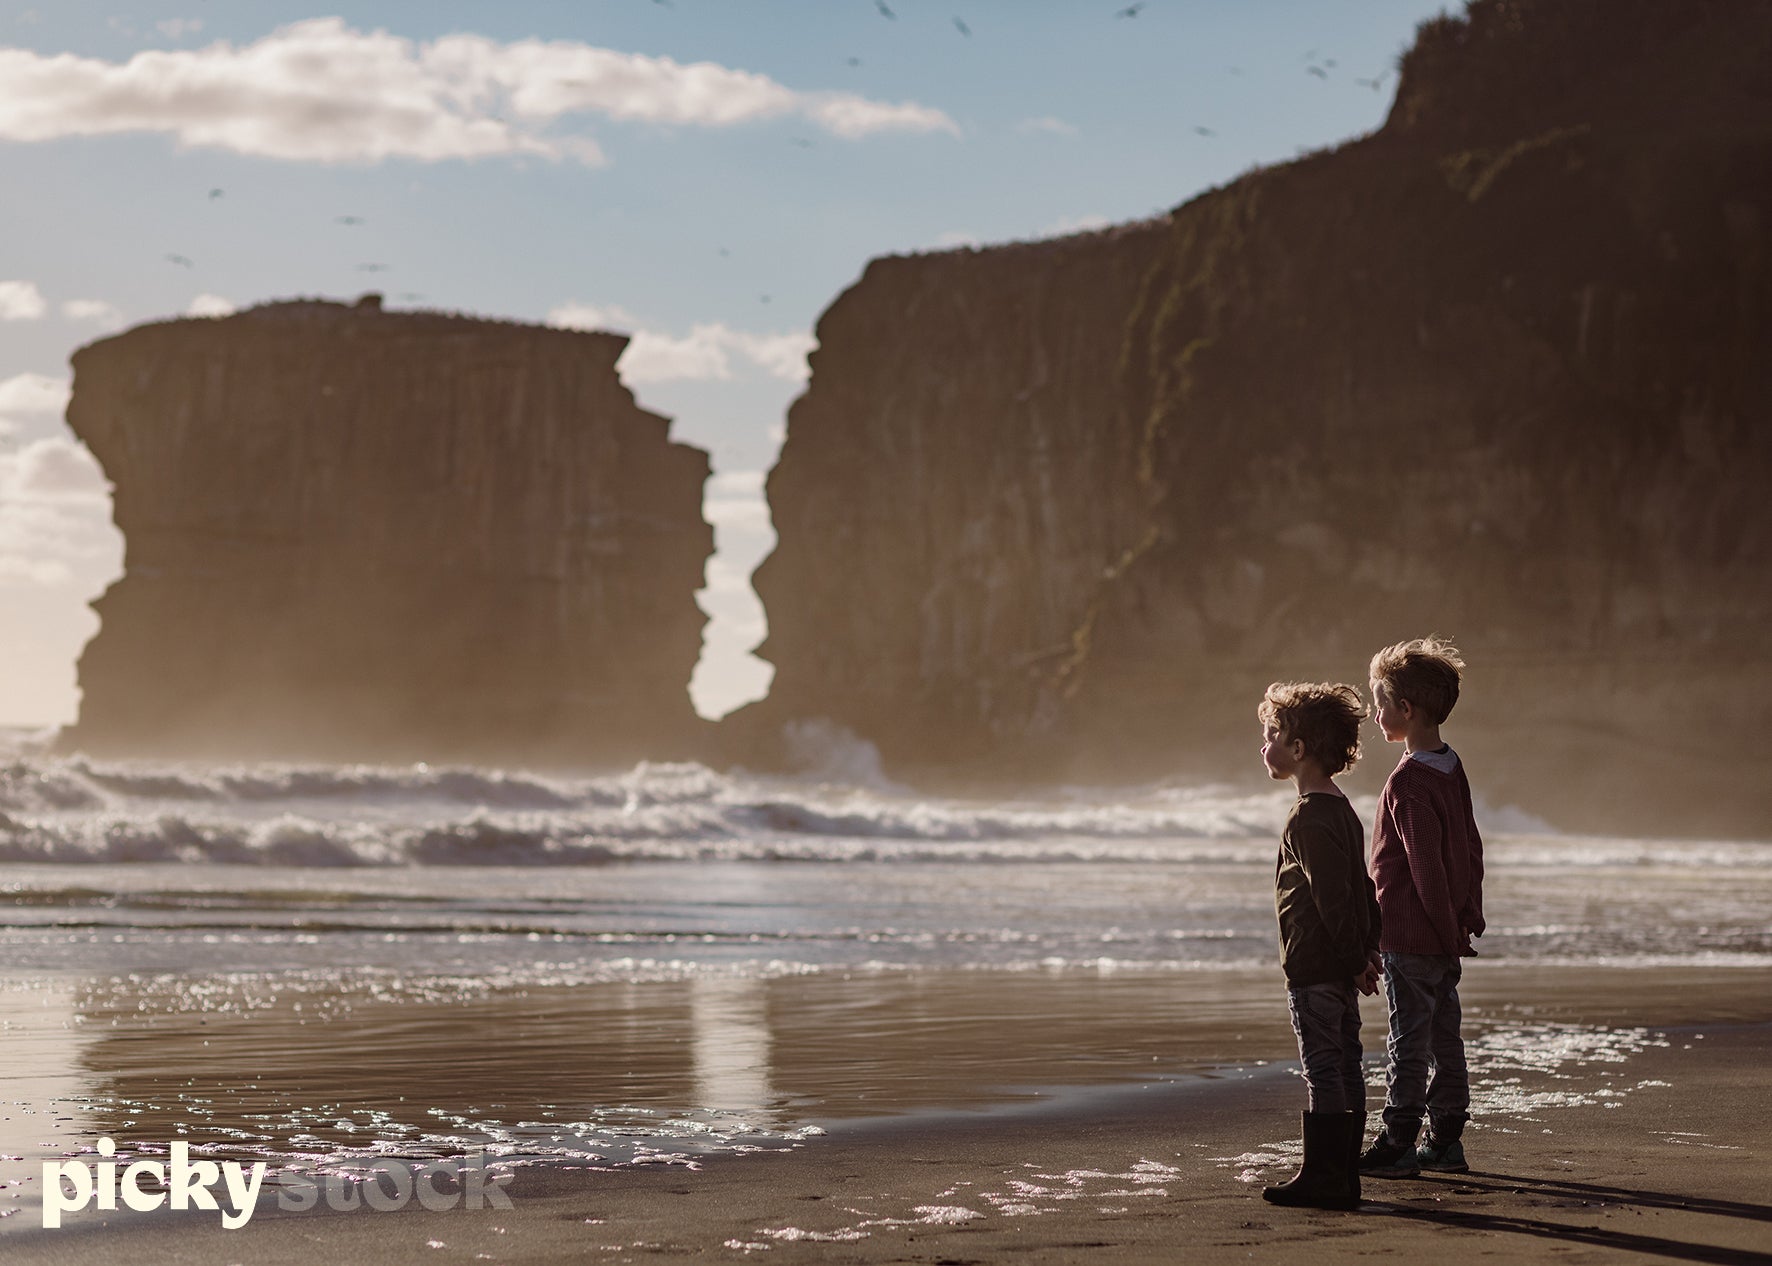 Two small young boys standing towards the ocean at sunset, watching the ocean. Reflection of each boy on the sand. Sand is back. Dramatic cliffs and rock face in the background of image. Ocean is rough with white caps and waves visible. West Coast NZ Beach